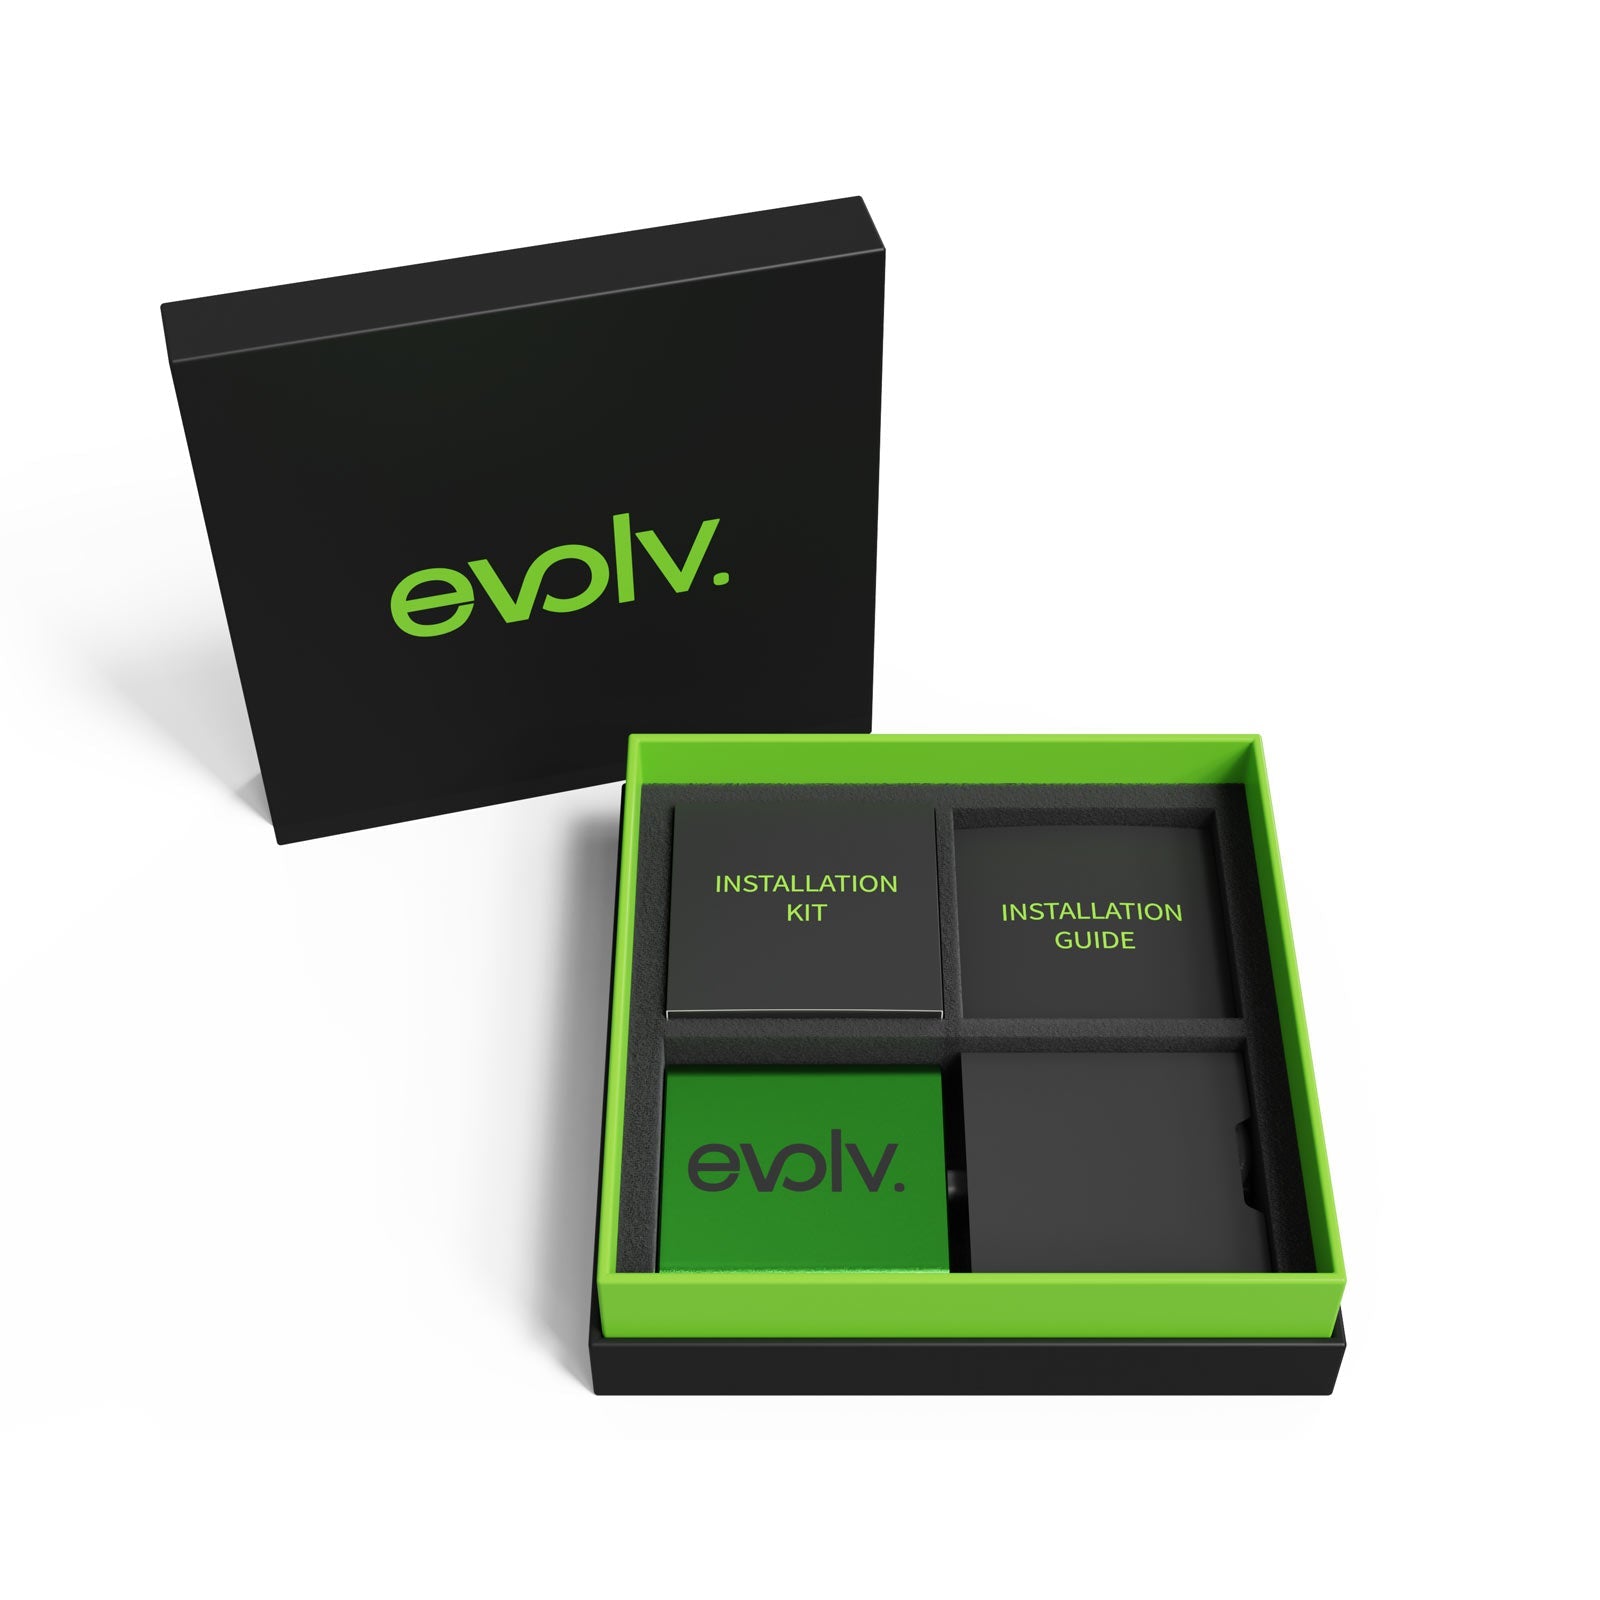 Increase your fuel mileage, performance and throttle response with an Evolv Ford Mustang Performance Chip!